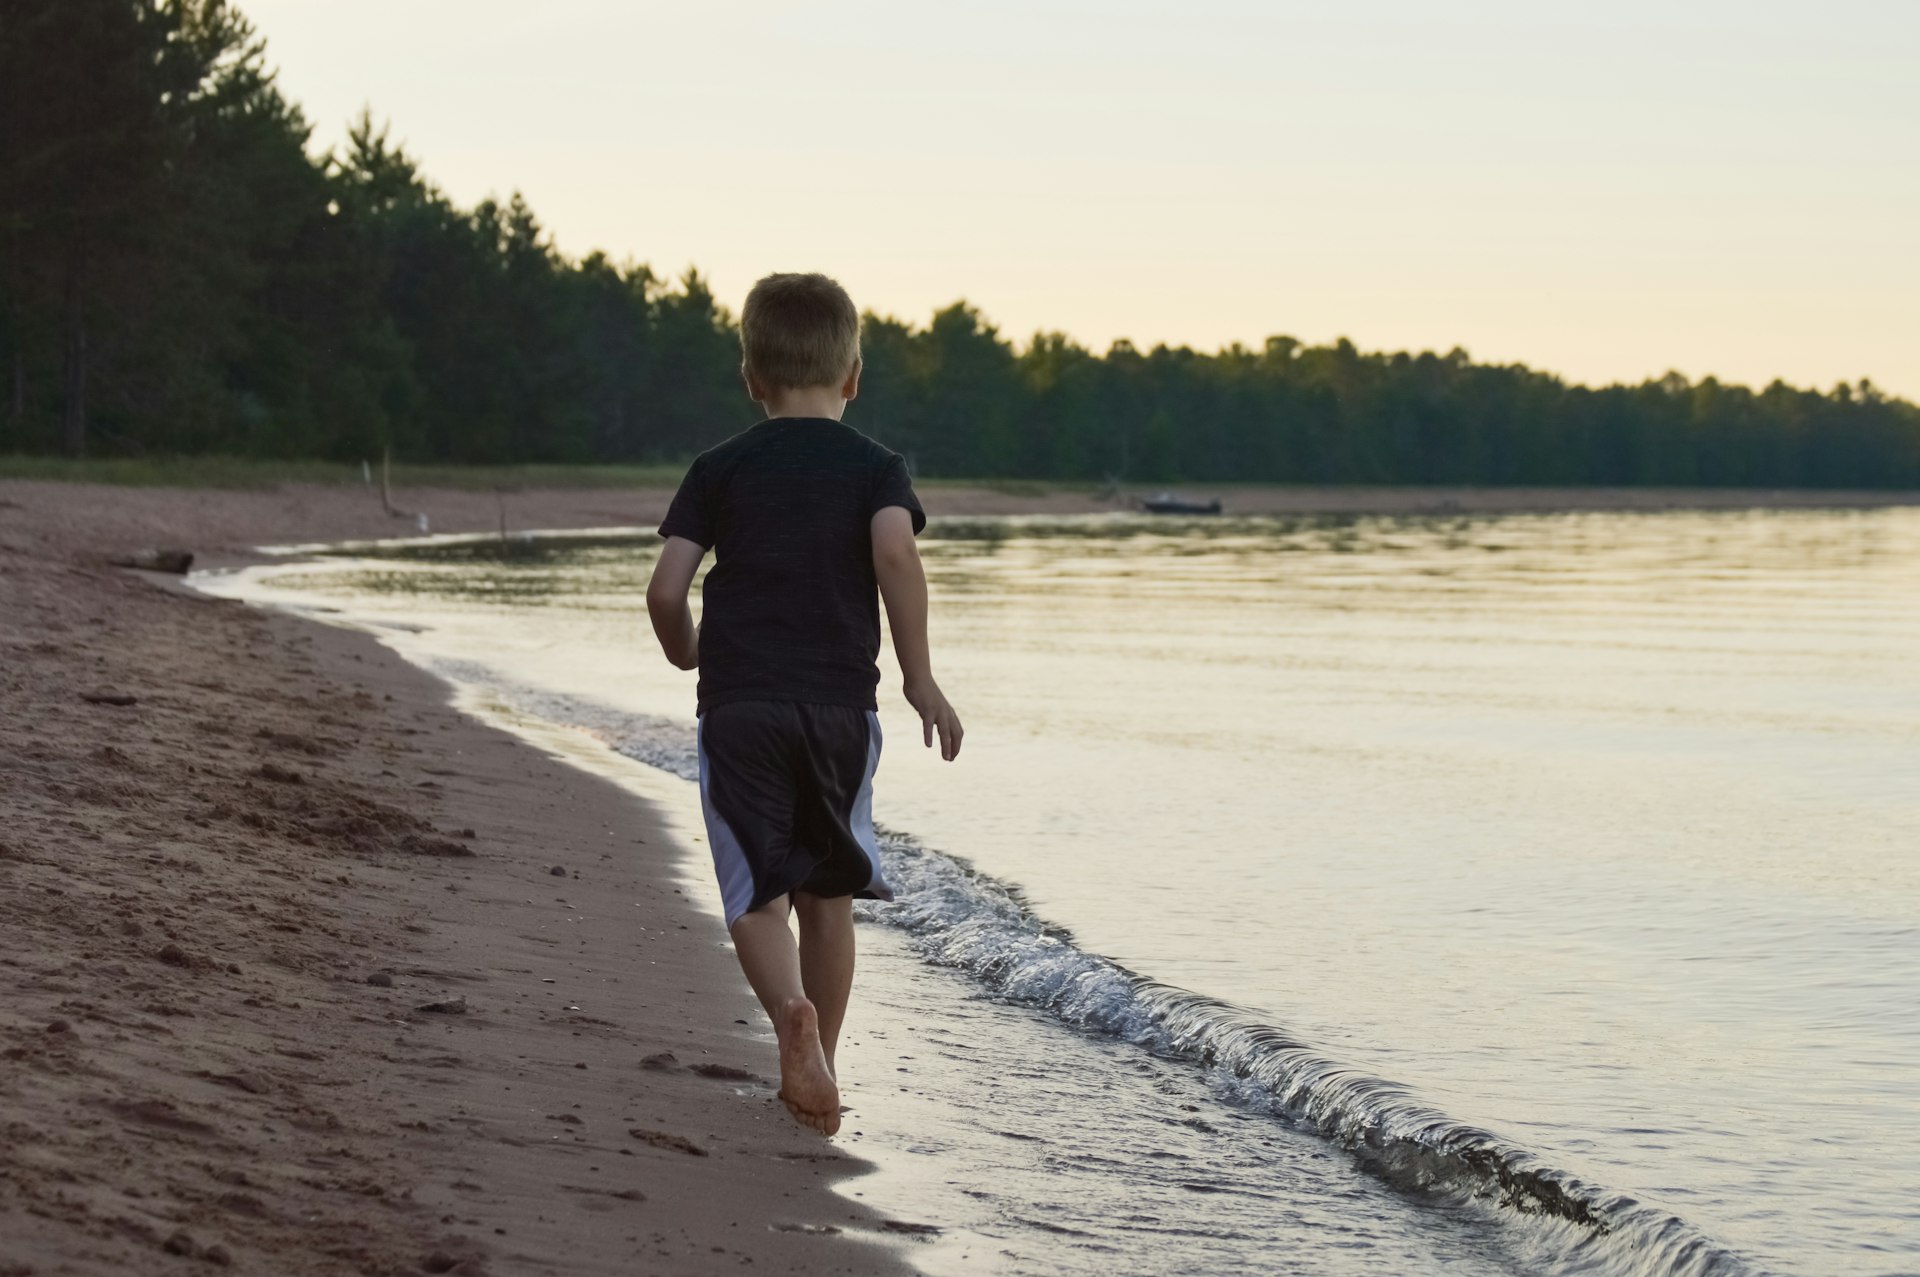 School aged boy runs on a deserted sandy beach surrounded by evergreen forest with a boat beached in the distance under yellow evening sky, Northern Wisconsin, Great Lakes, USA